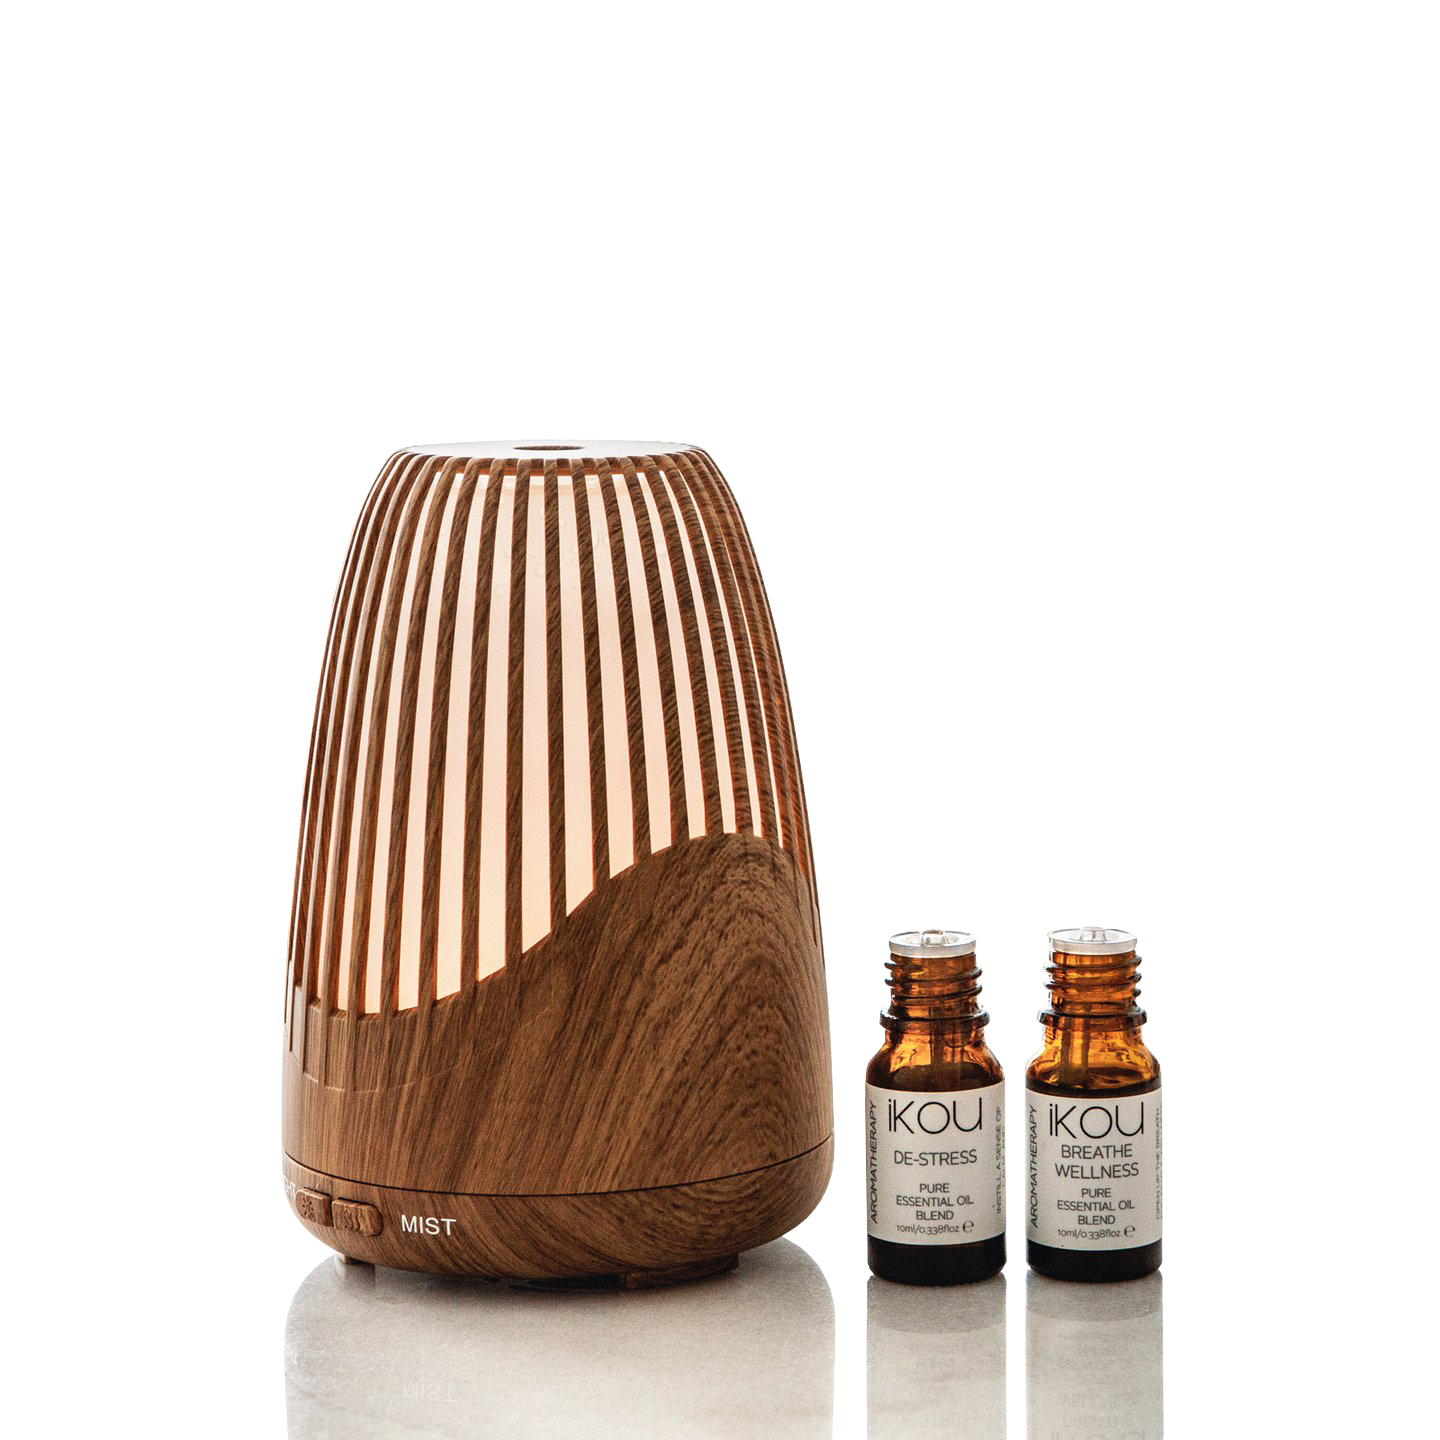 
                  
                    iKOU Aromatherapy Ultrasonic Diffuser Diffuse iKOU essential oils through the room and enjoy aromatherapy benefits while also purifying the air. With cool-steam technology and automatic power-off this diffuser allows you to distill your favourite essential oils through the room safely and without heat.
                  
                